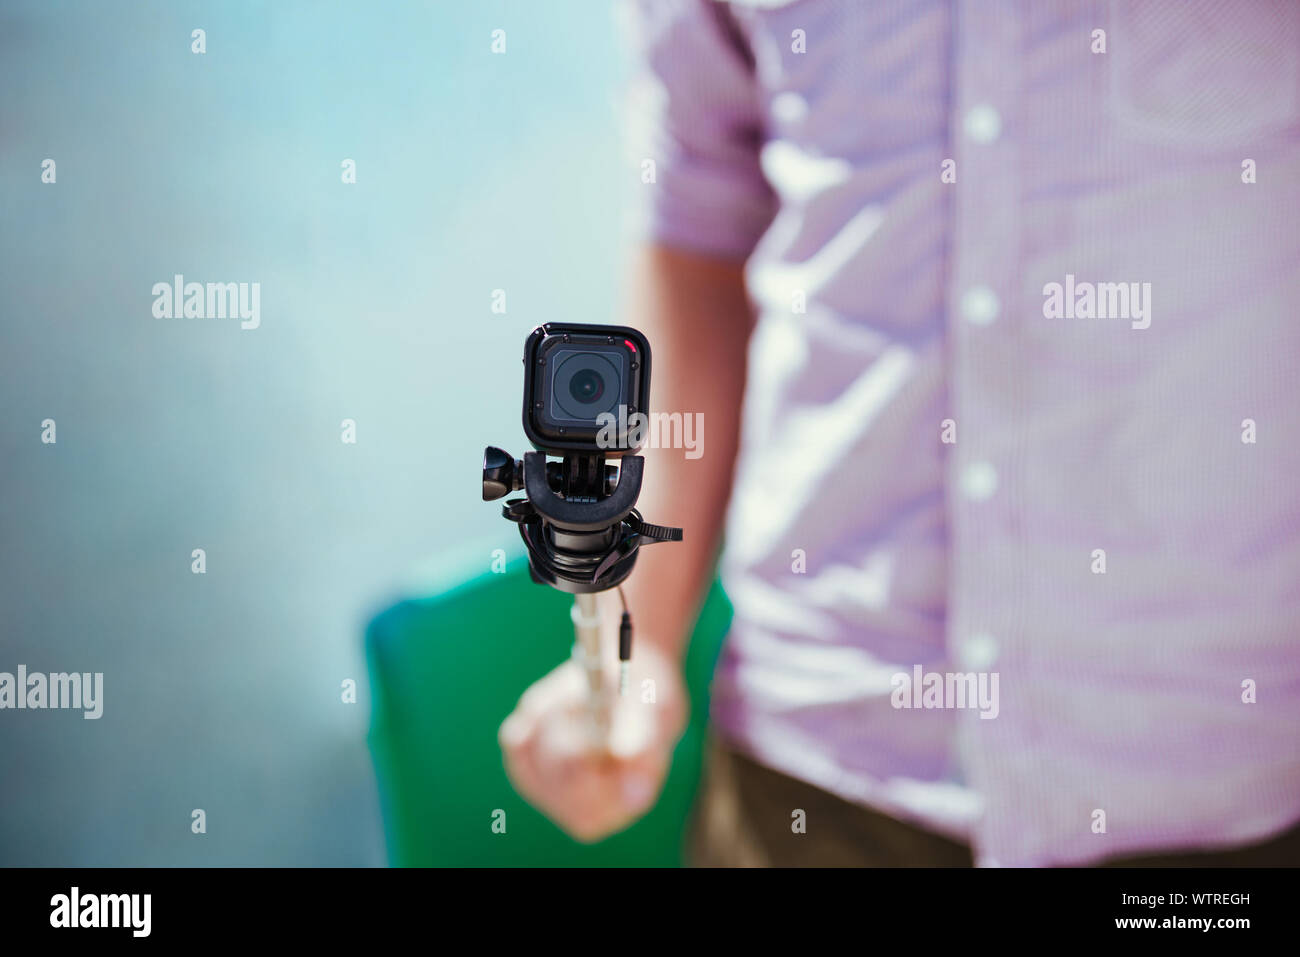 Midsection Of Man Holding Wearable Camera Stock Photo